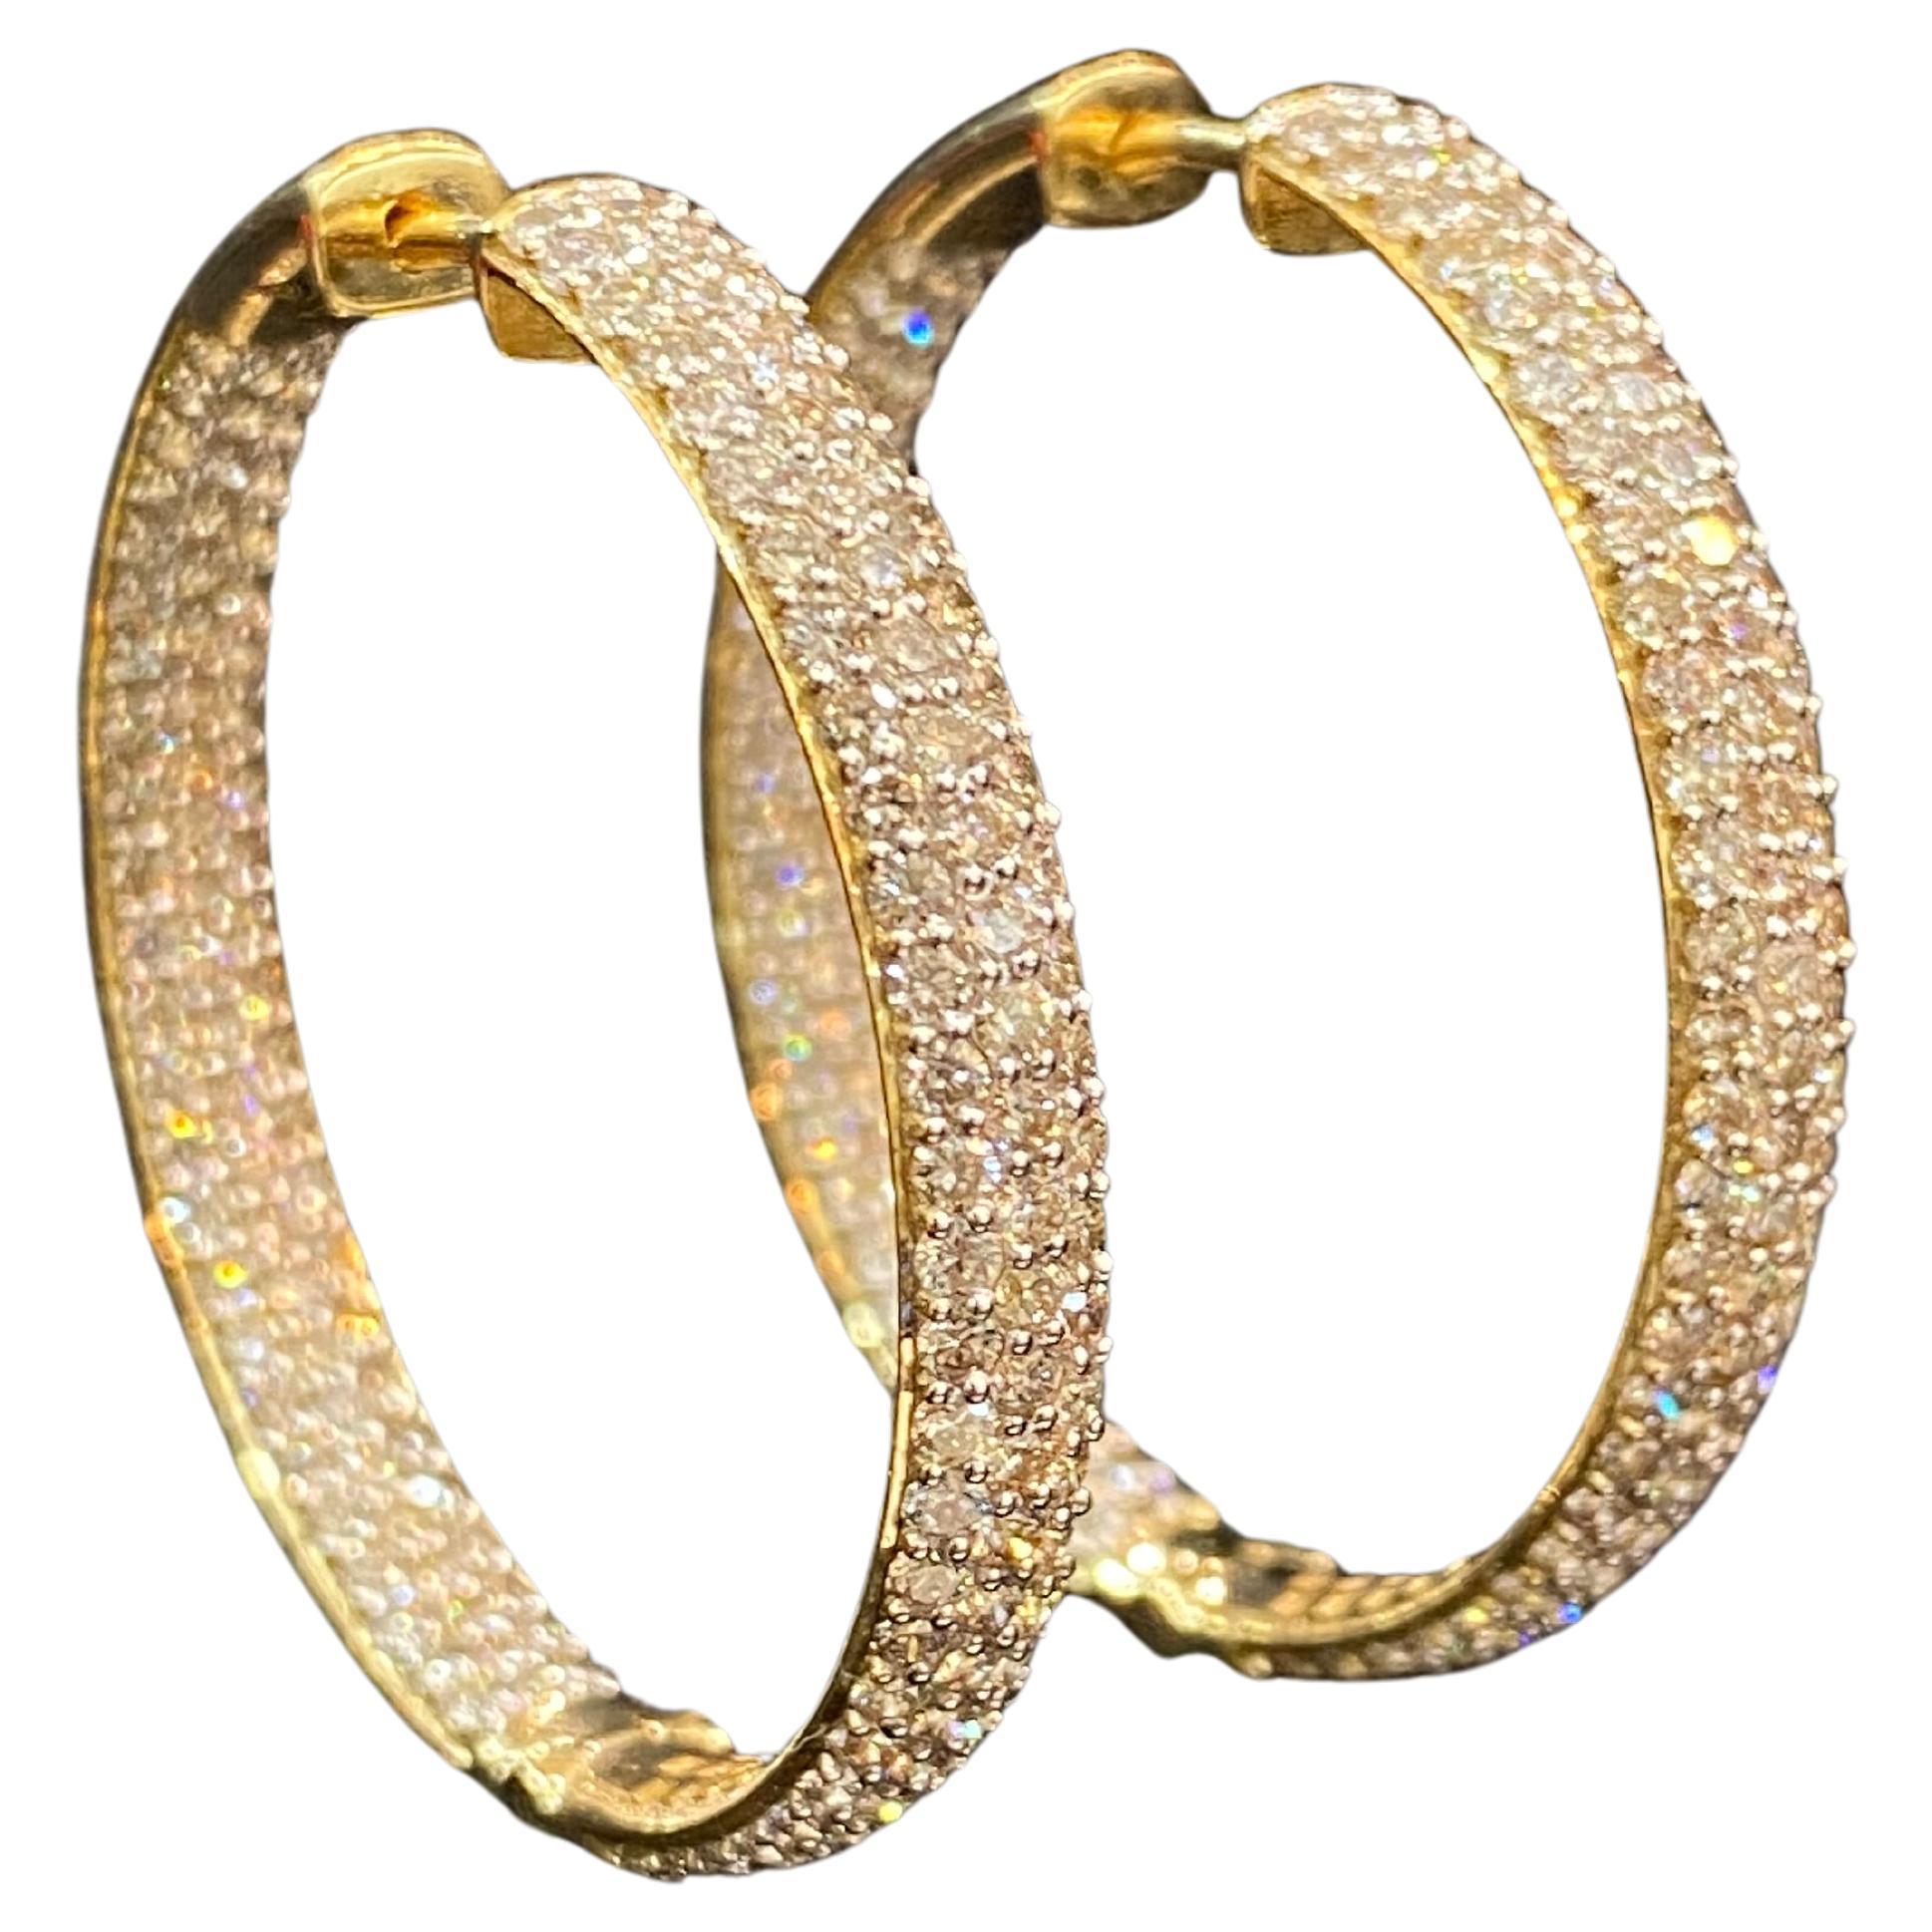 Pave 5.72 Cts F/VS1 Round Brilliant Diamonds 3-Row Hoop Earrings 14K Yellow Gold For Sale